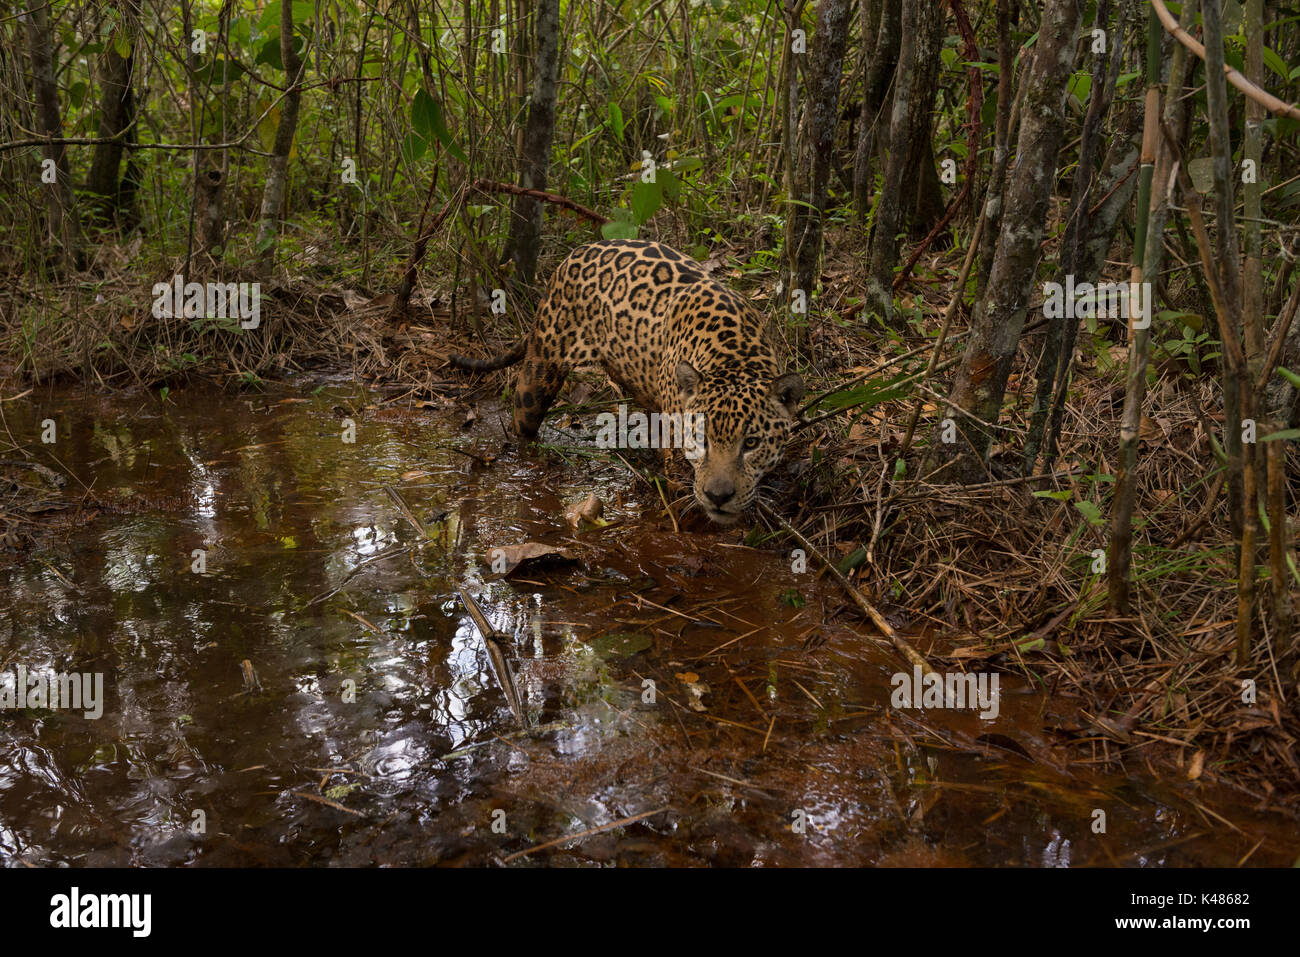 A Jaguar explores a small water creek inside a forest in Central Brazil Stock Photo